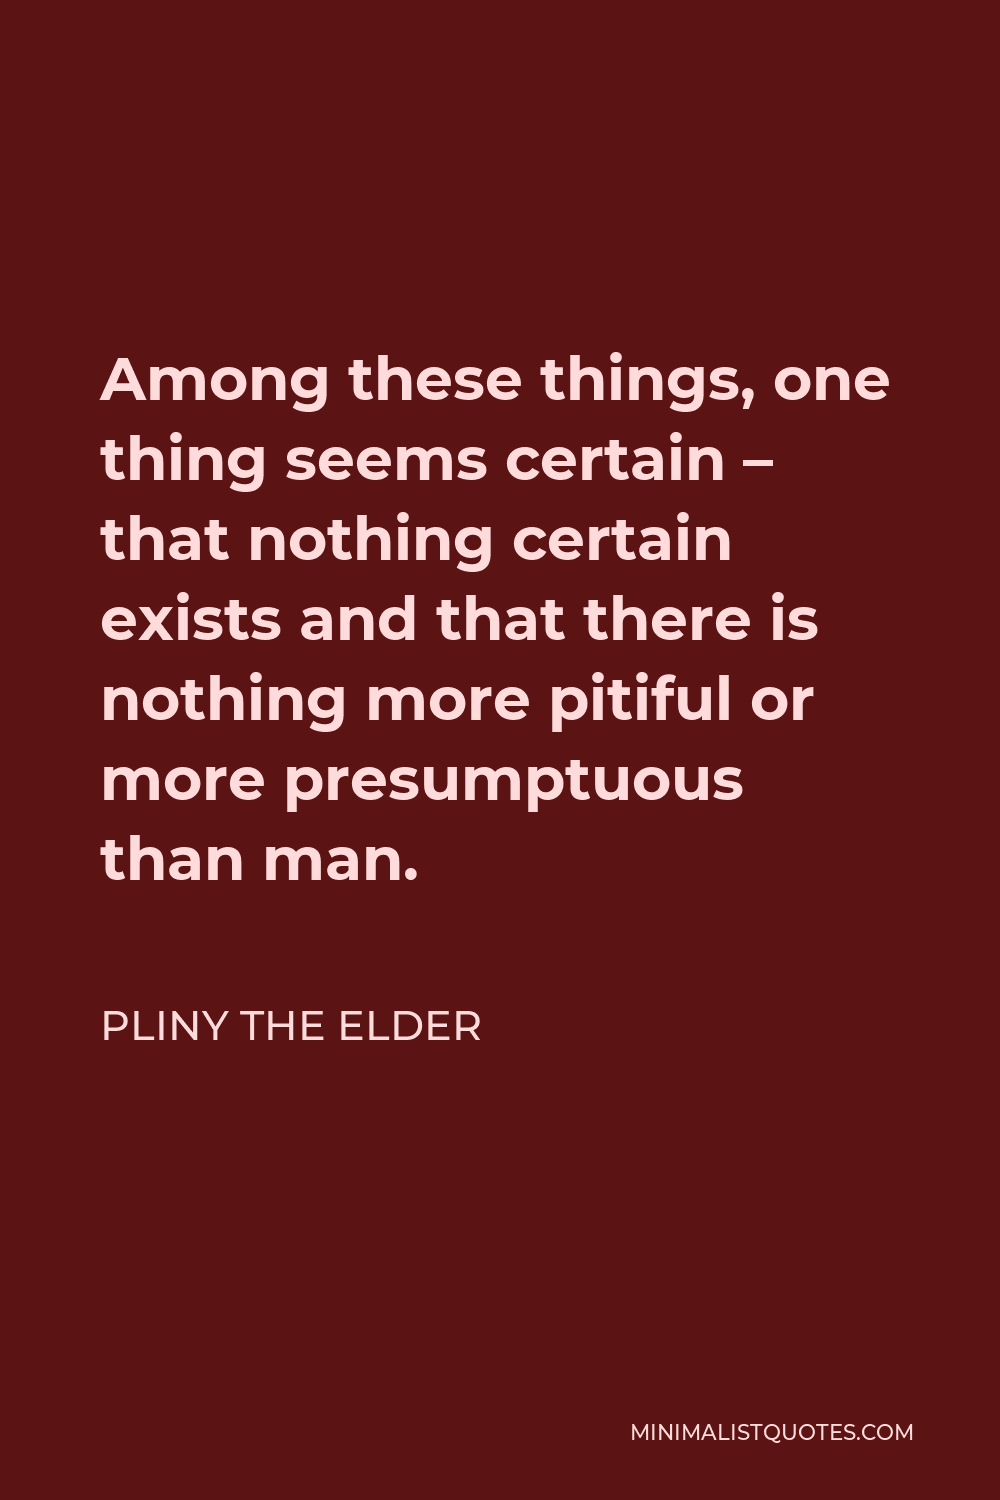 Pliny the Elder Quote - Among these things, one thing seems certain – that nothing certain exists and that there is nothing more pitiful or more presumptuous than man.